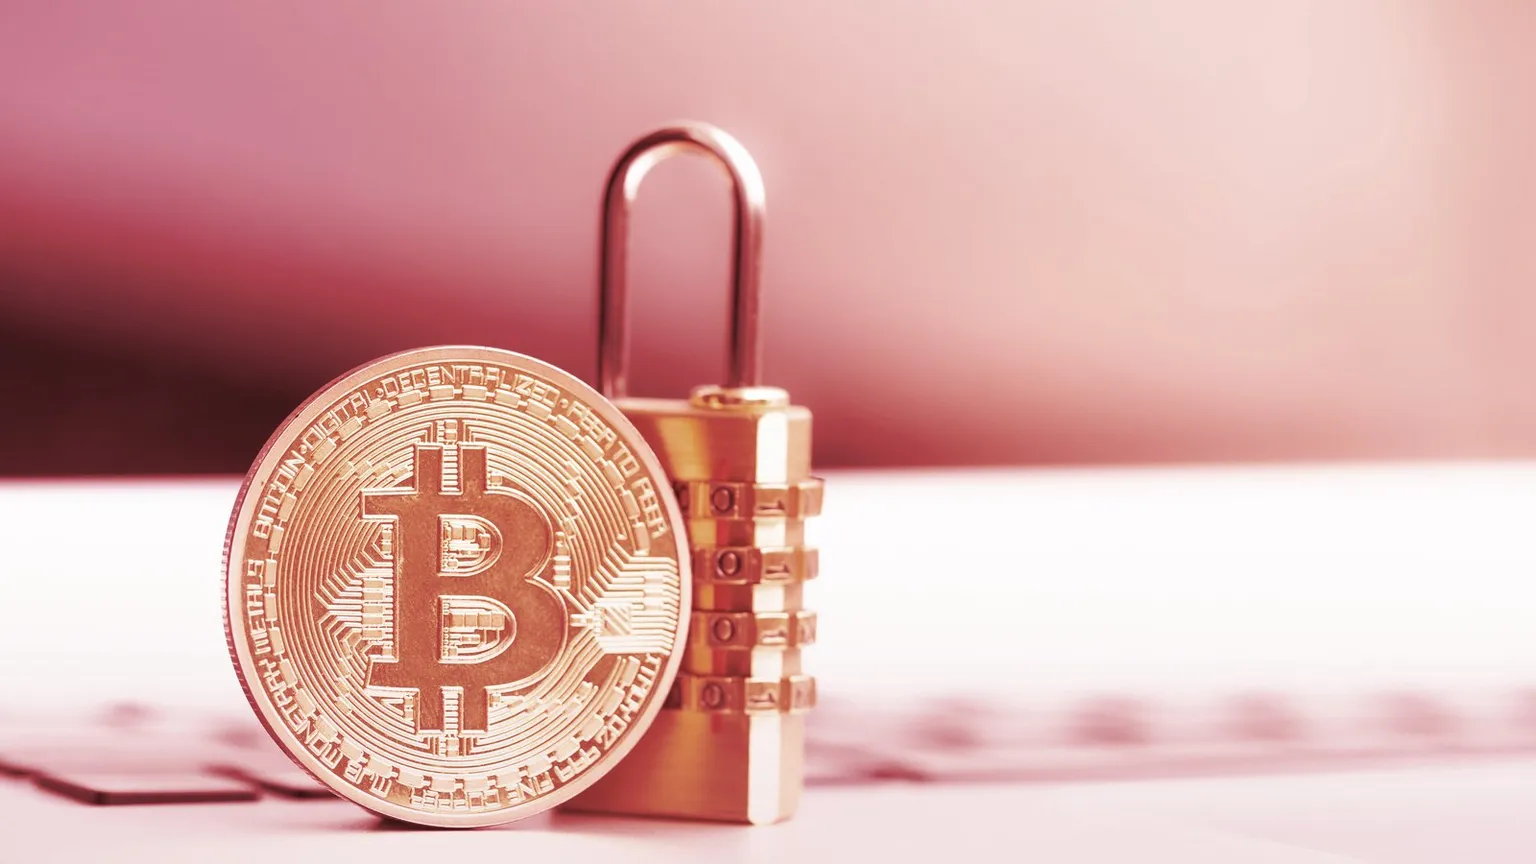 How private are standard Bitcoin transaction? Not very. Image: Shutterstock